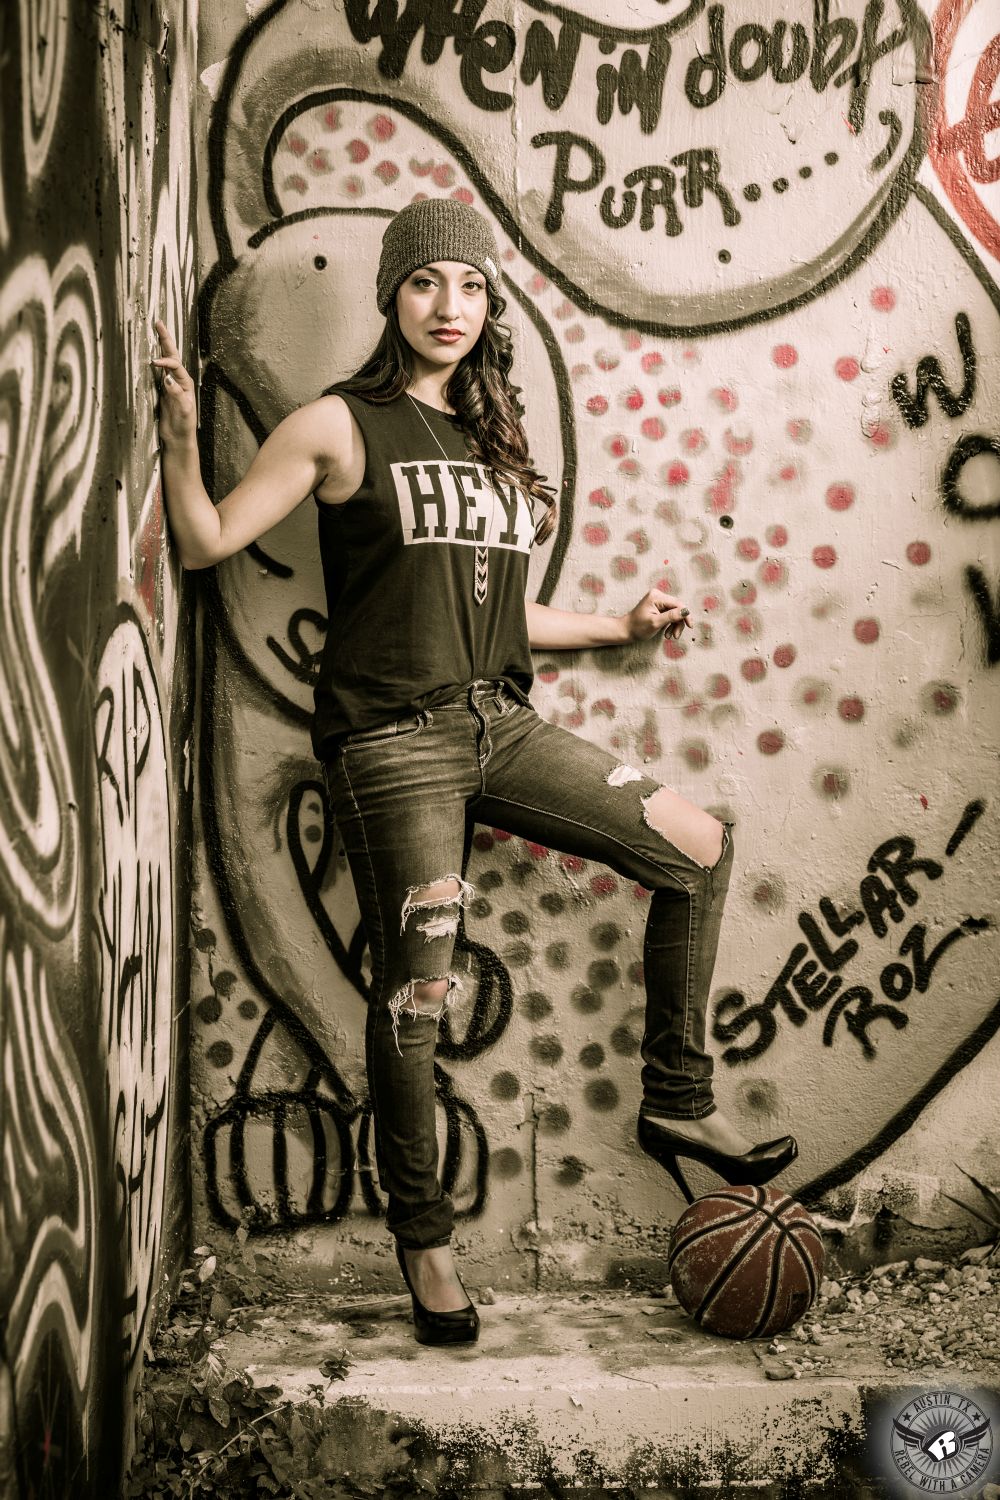 Urban high school senior portrait photography of girl in ripped jeans and high heels with hair and makeup by Divaz Fabula at the Castle Hill Graffiti Wall in Austin, Texas.